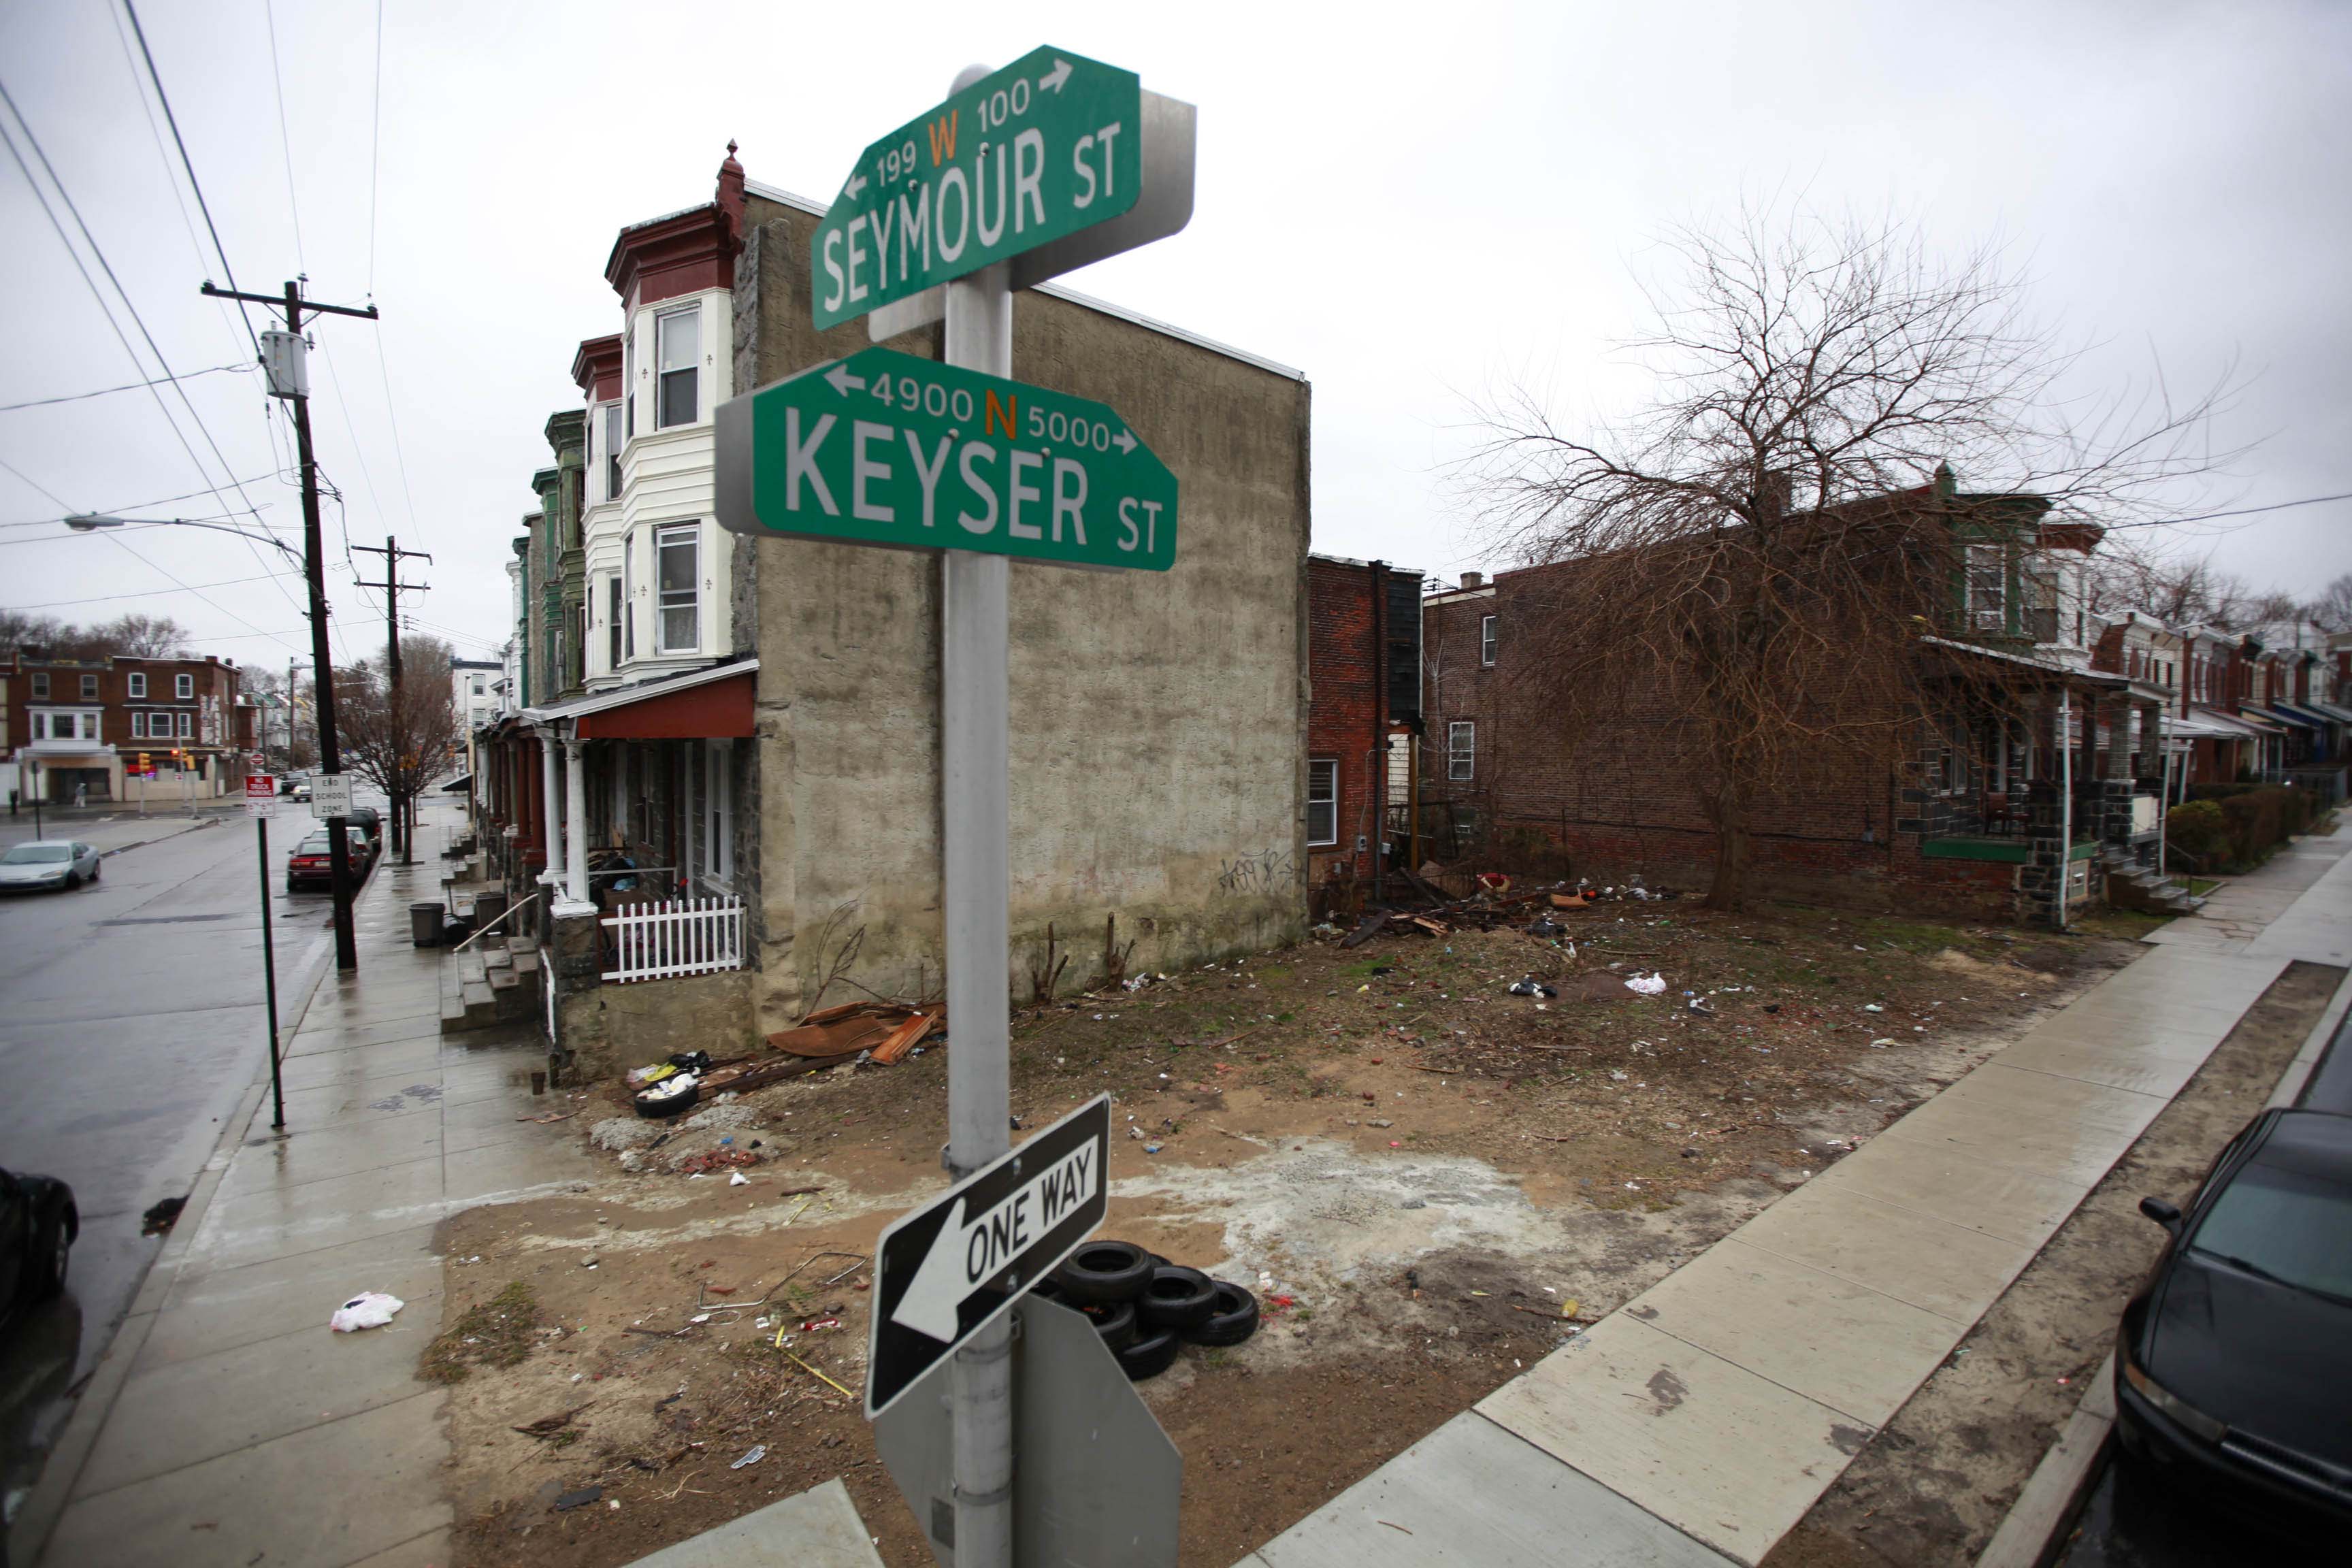 Seymour and Keyser streets is the Germantown section of Philadelphia March 6, 2013. ( David Swanson / Inquirer Staff Photographer)